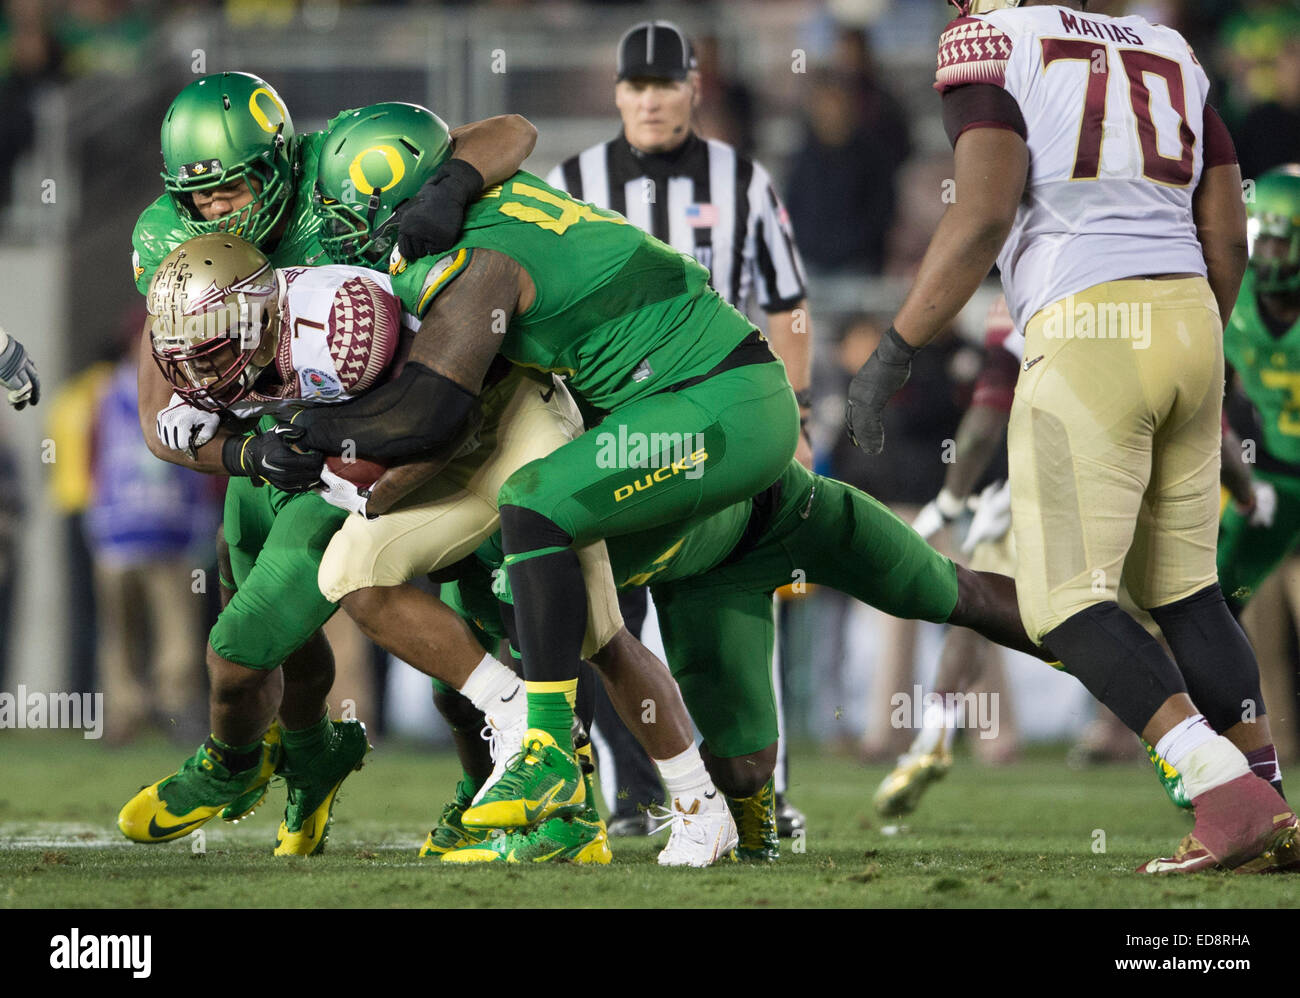 Los Angeles, USA. 1st Jan, 2015. Mario Pender (2nd L) of Florida State Seminoles breaks through during the 2015 Rose Bowl college football game against the Oregon Ducks at Rose Bowl in Los Angeles, the United States, Jan. 1, 2015. Oregon Ducks won the game 59-20. Credit:  Yang Lei/Xinhua/Alamy Live News Stock Photo